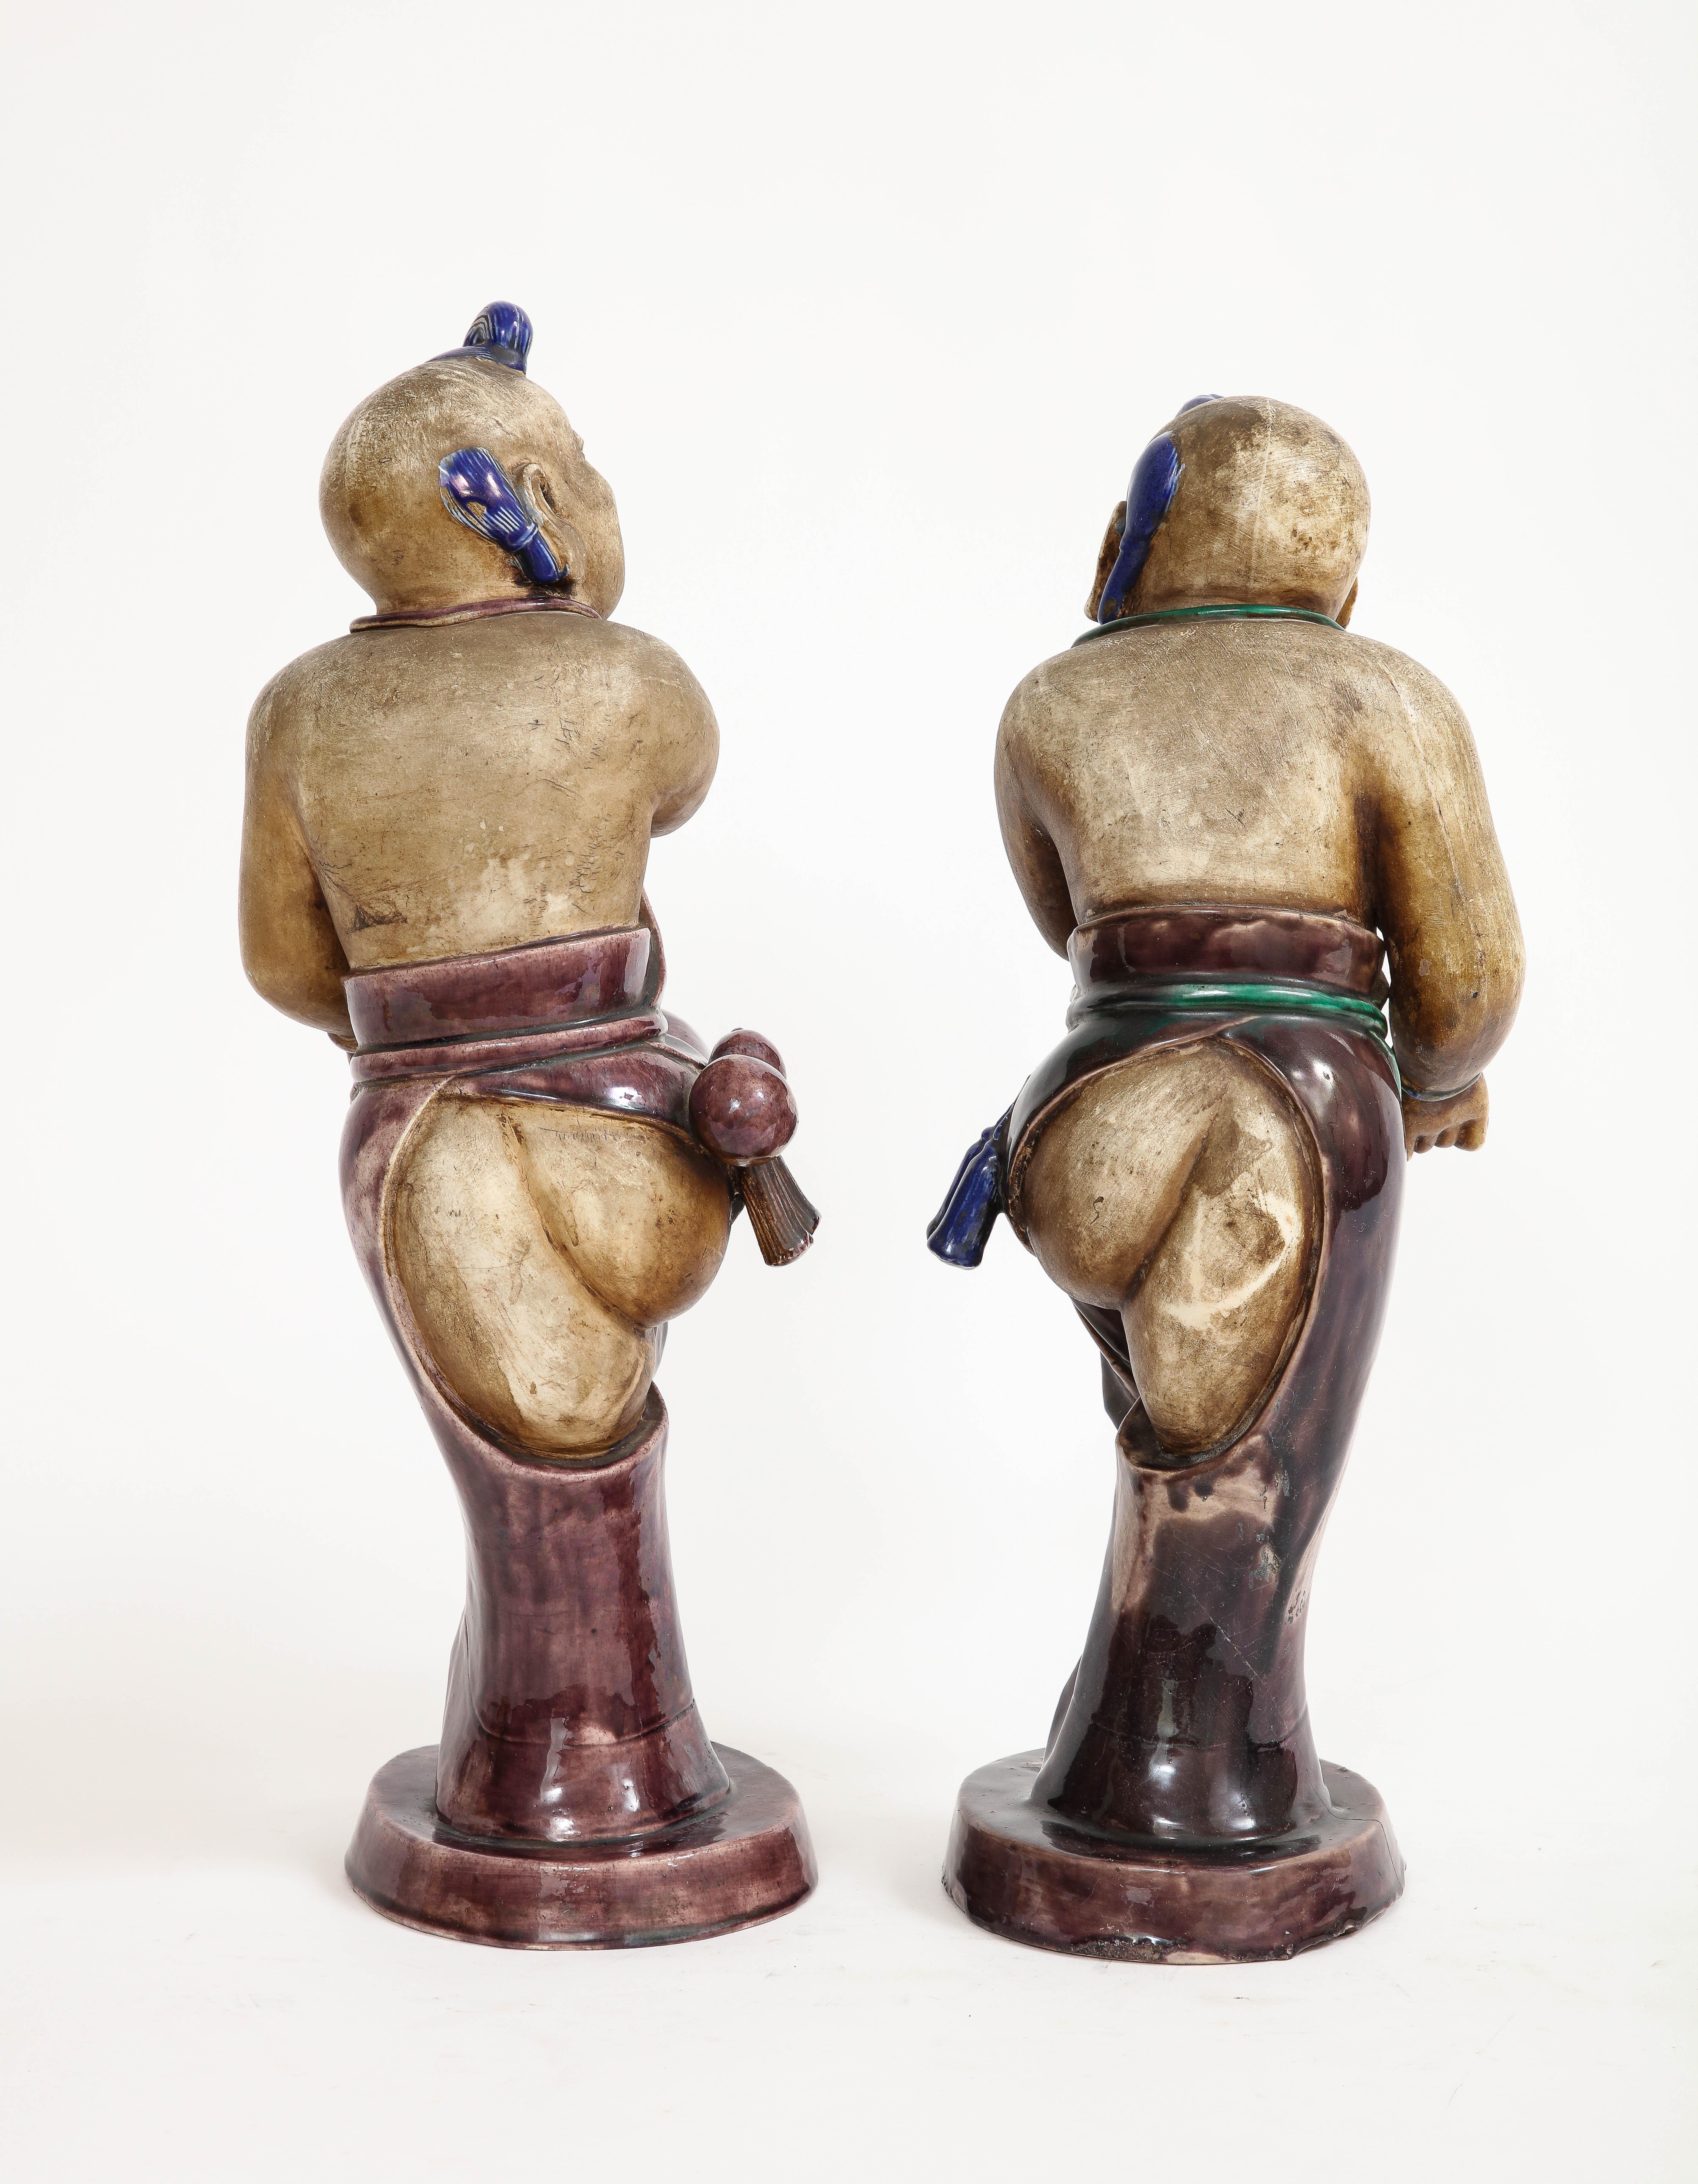 A Rare Pair Chinese Kangxi Biscuit Porcelain Figures of Boy w/ Enamel Decoration For Sale 1